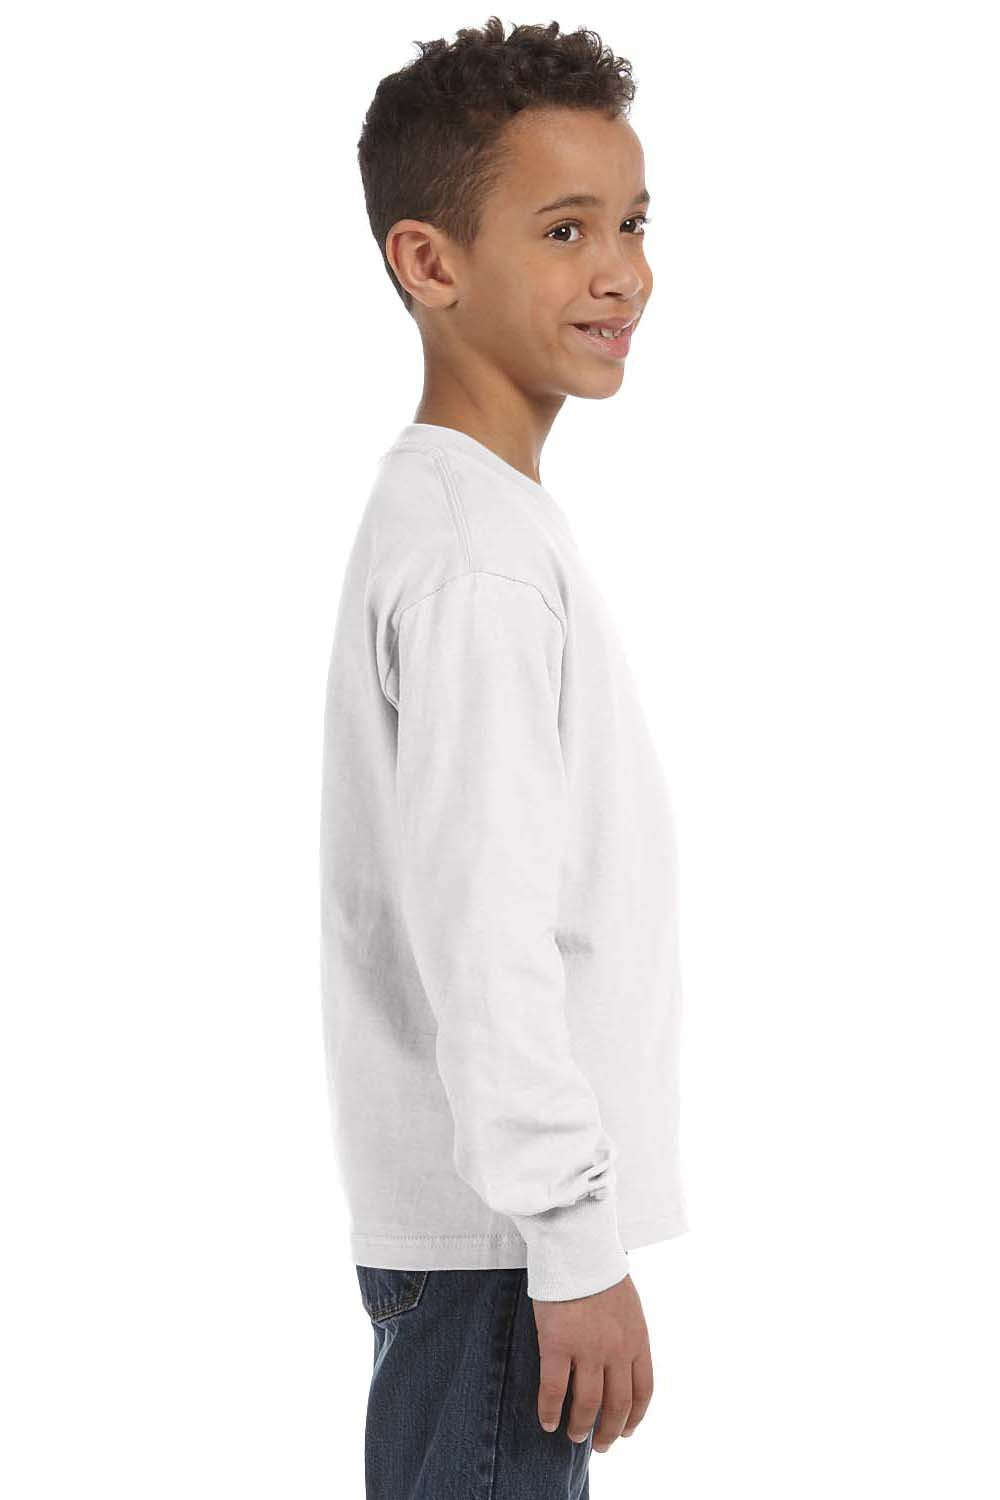 Fruit Of The Loom 4930B Youth HD Jersey Long Sleeve Crewneck T-Shirt White Side